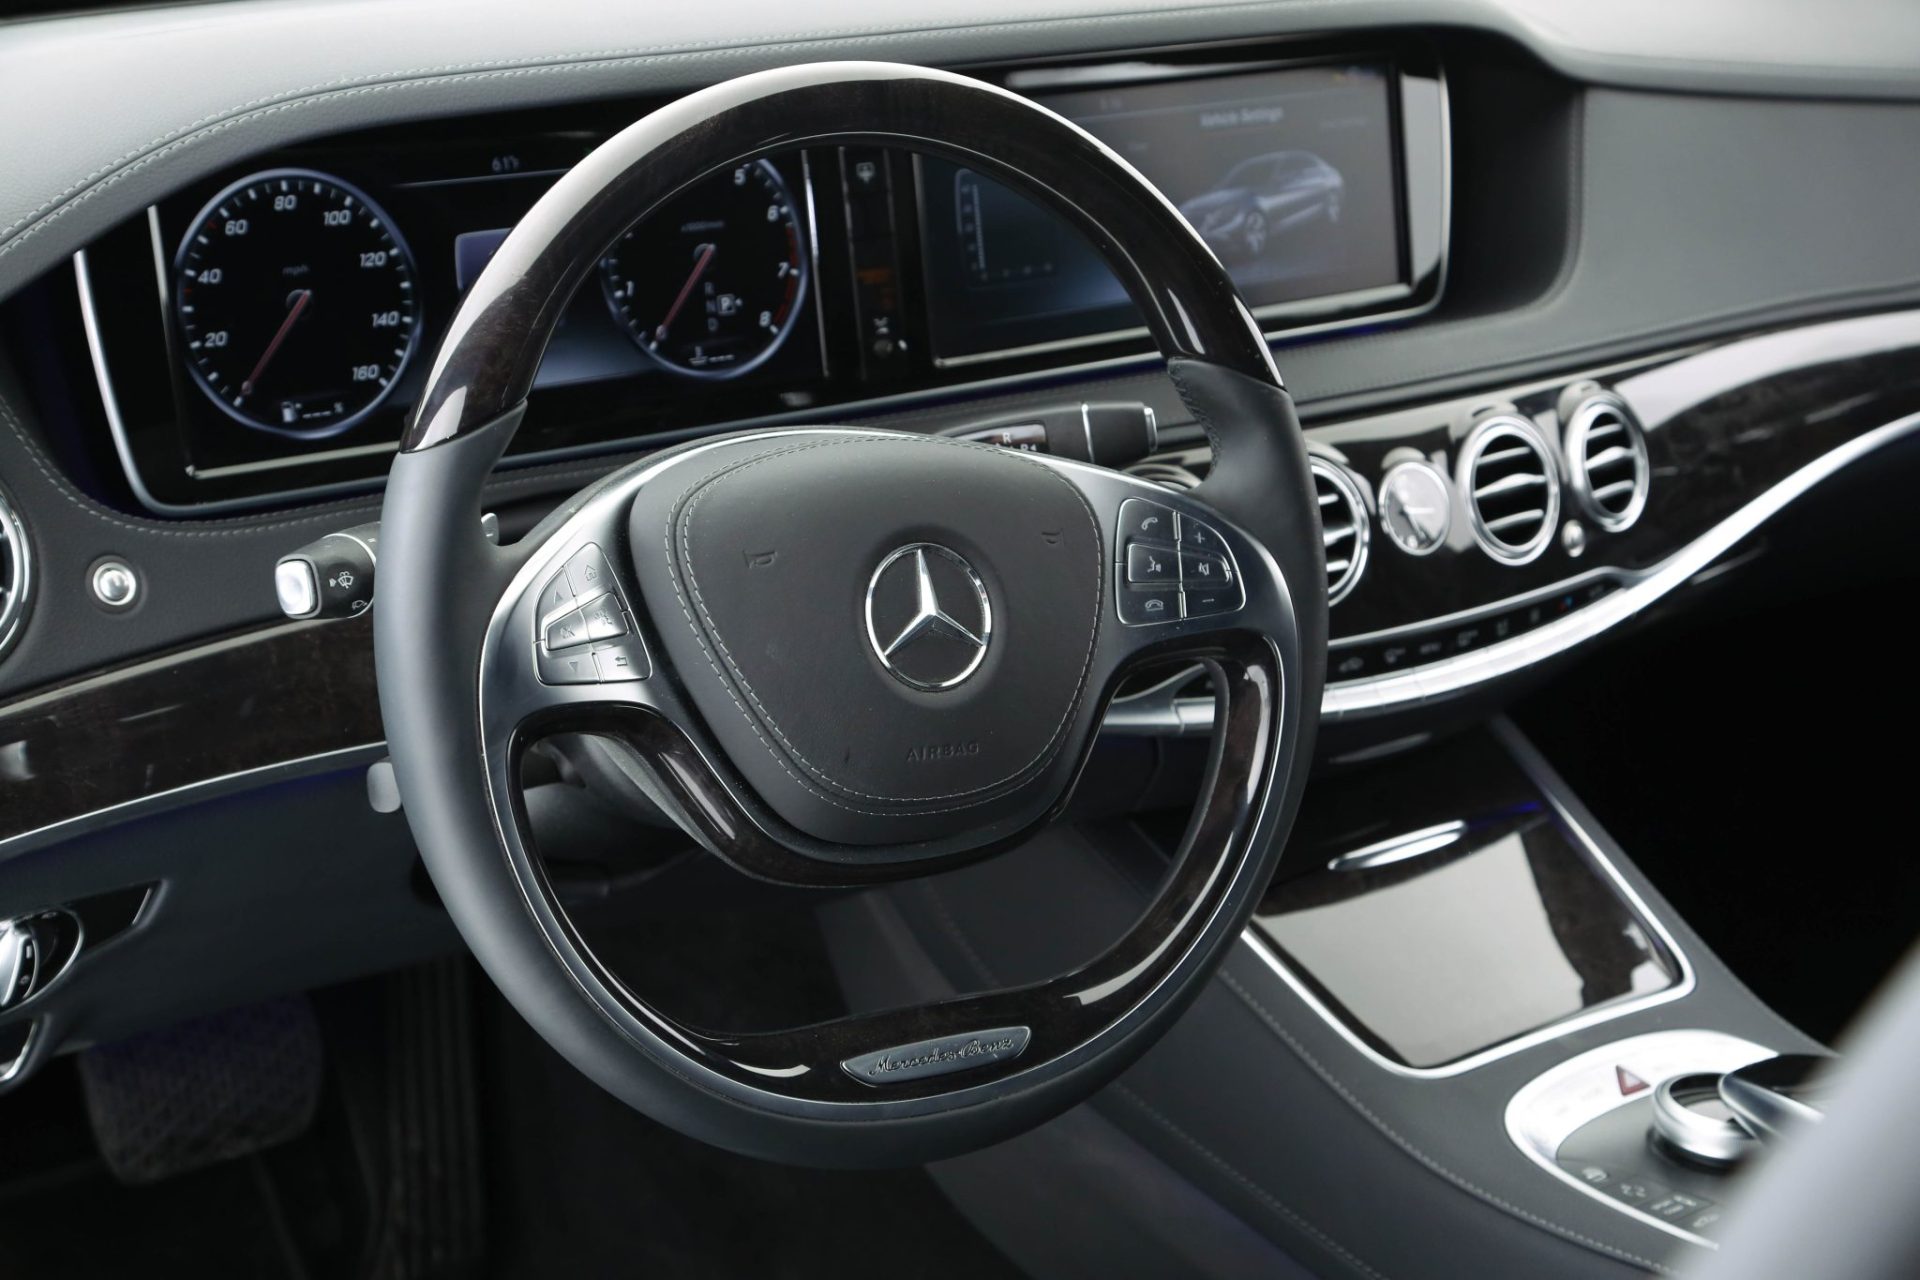 Mercedes Benz S-Class Stretched Limousine - Interior Photo #2